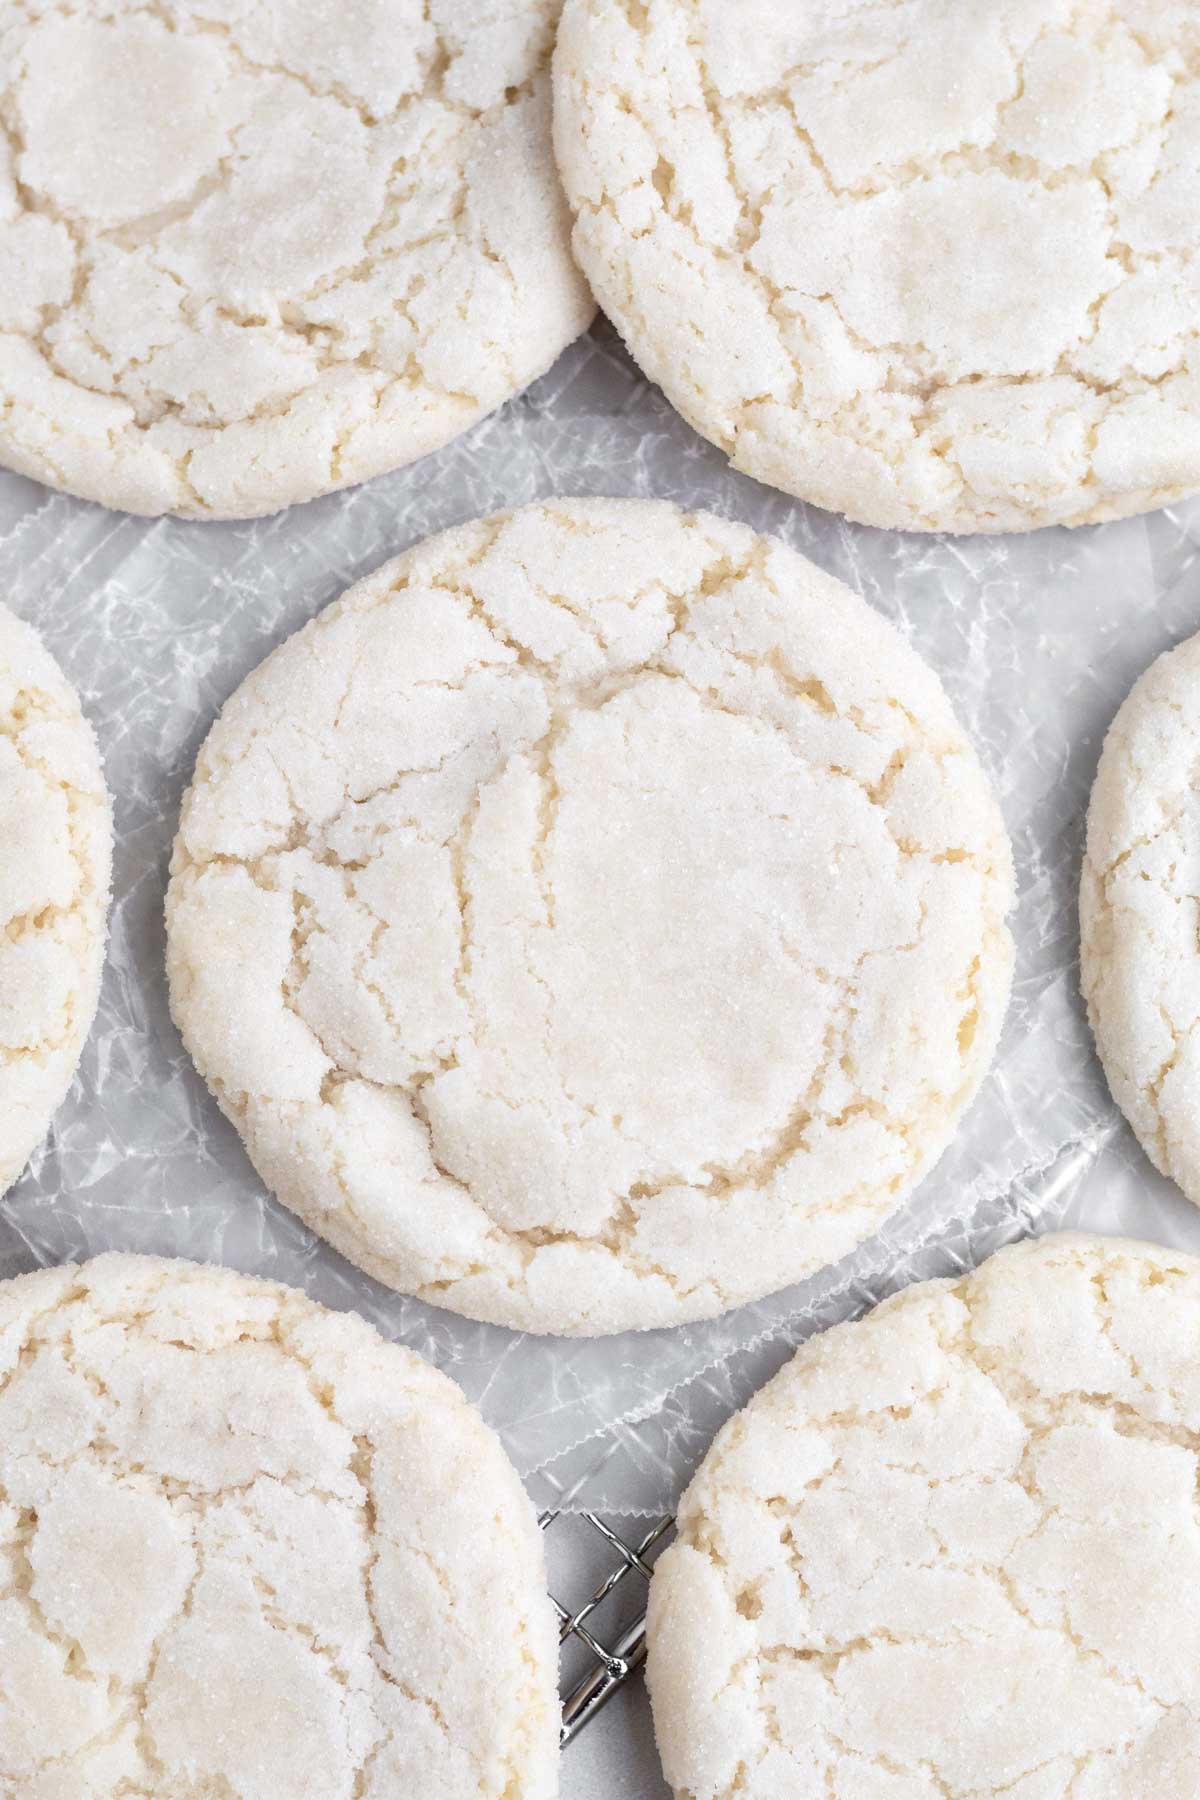 A sugar crystals sparkle on crinkled top of the delicious Crispy Sugar Cookie.